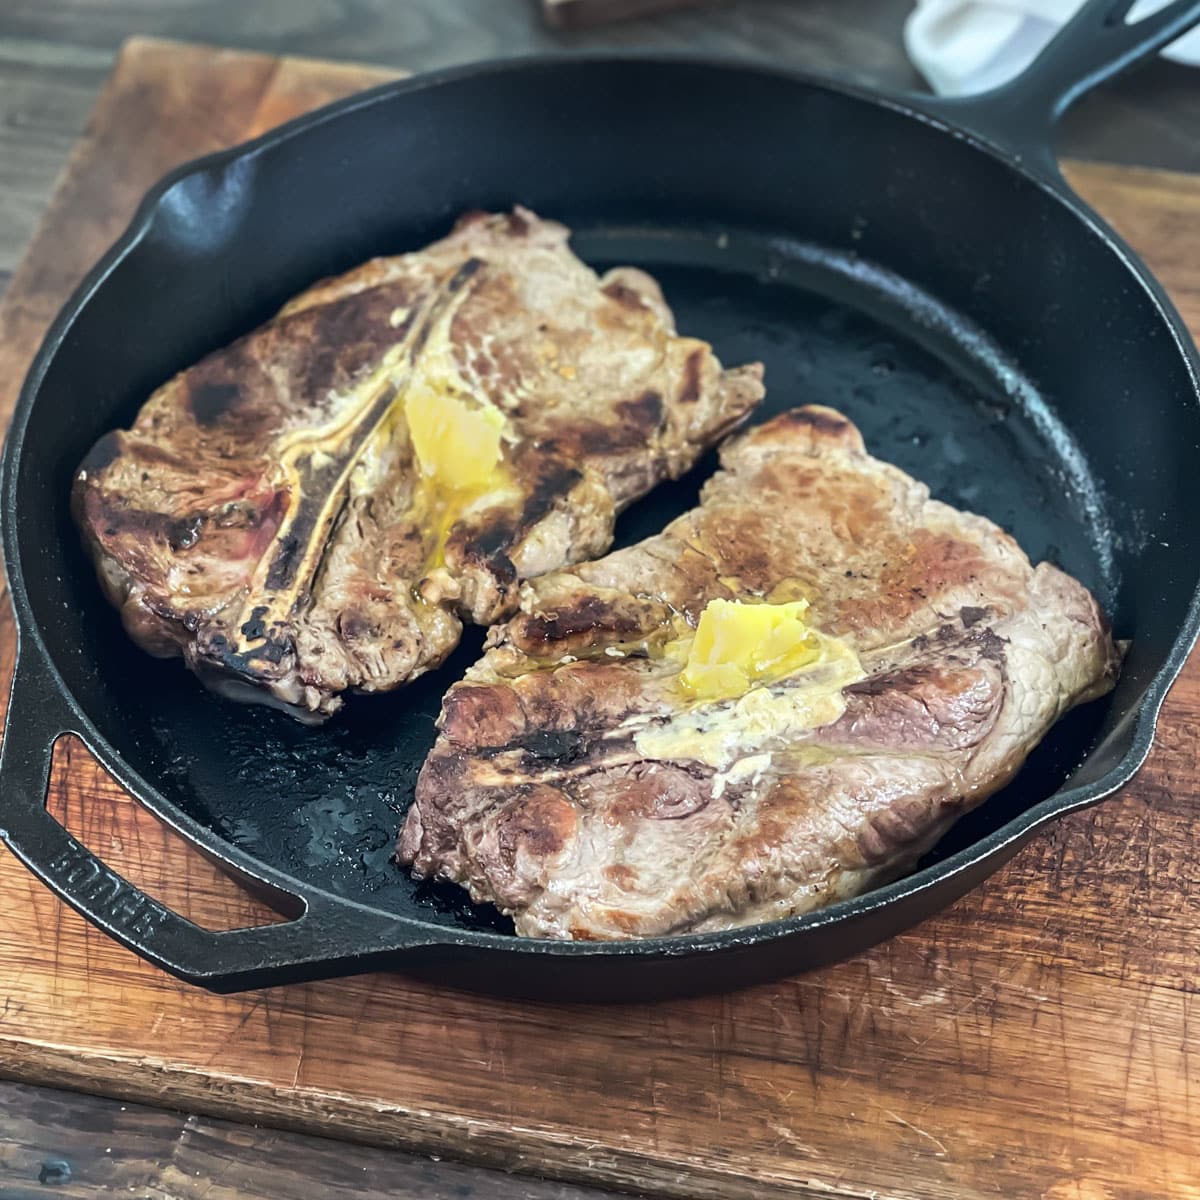 Large pork steaks in a cast iron skillet with pats of butter on top.